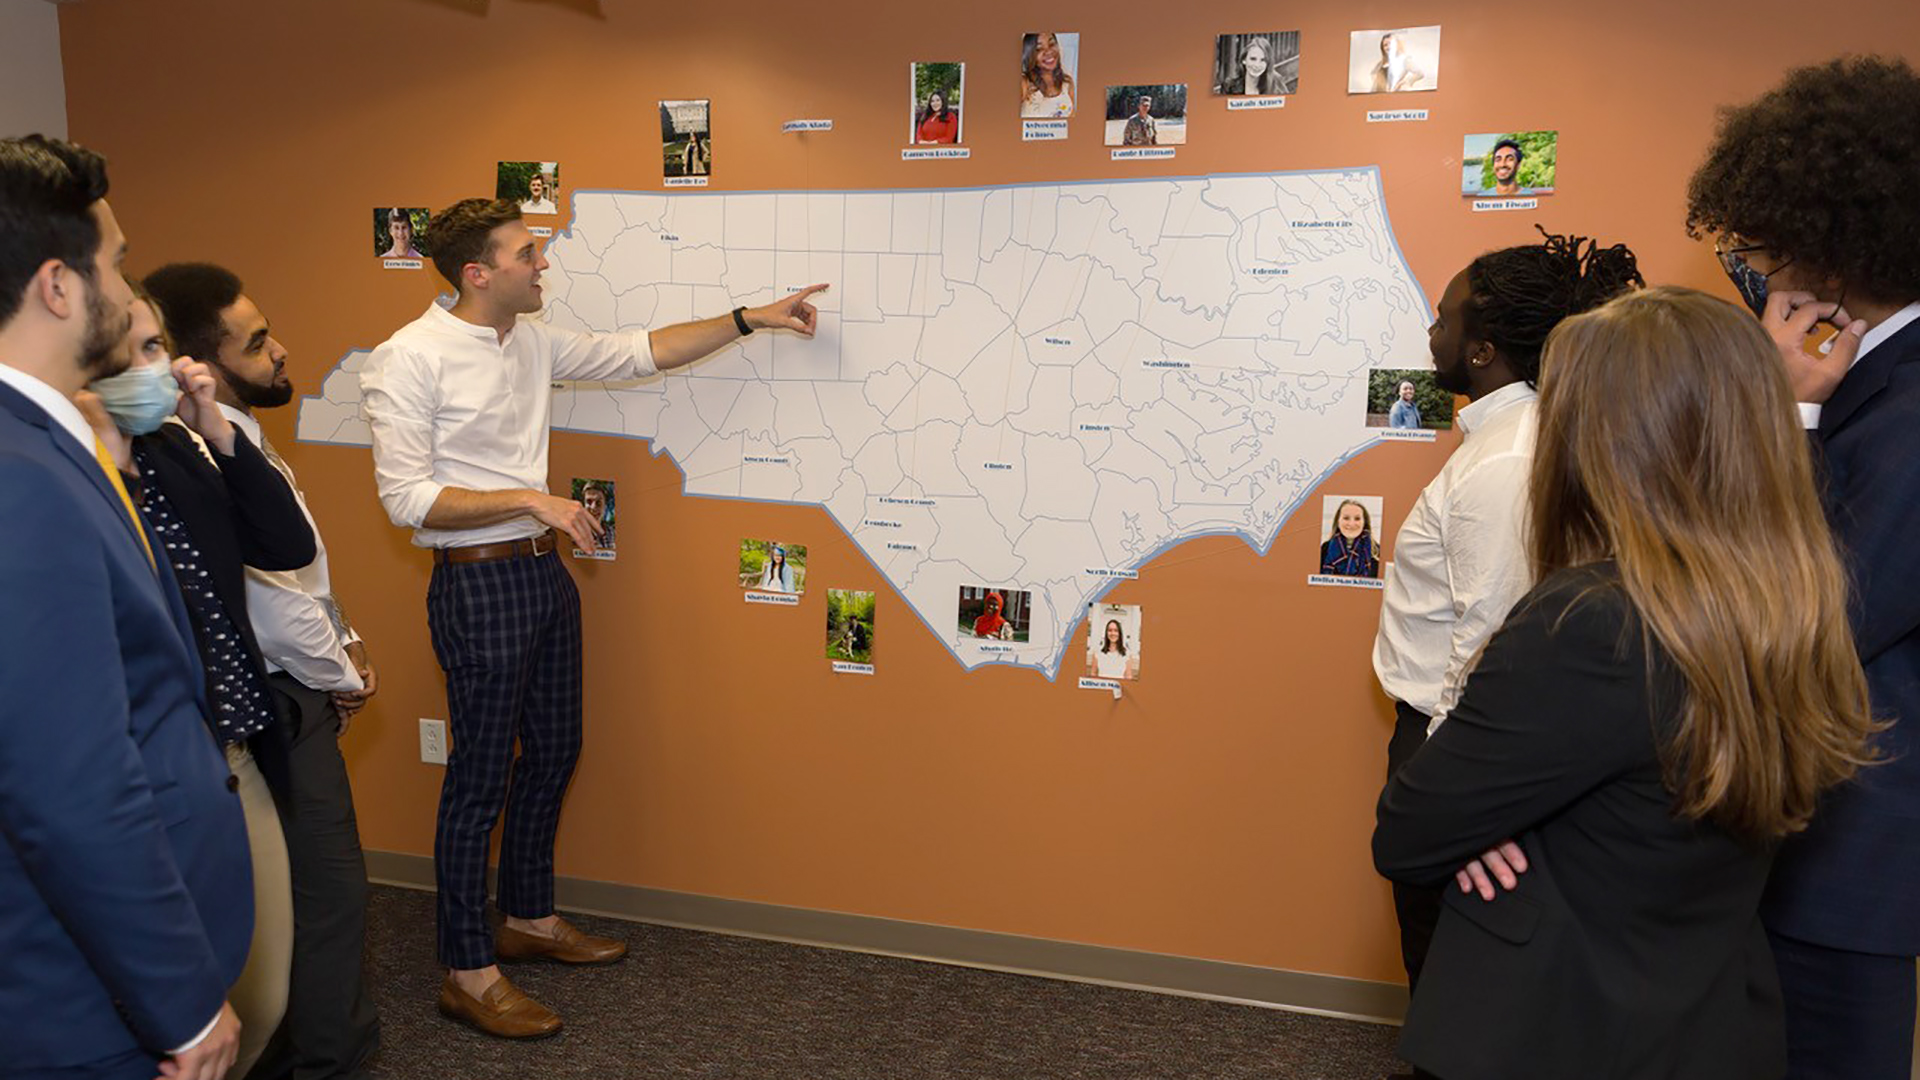 A group of people in business wear gather around a large white map of North Carolina on an orange wall with many photos around the edges.